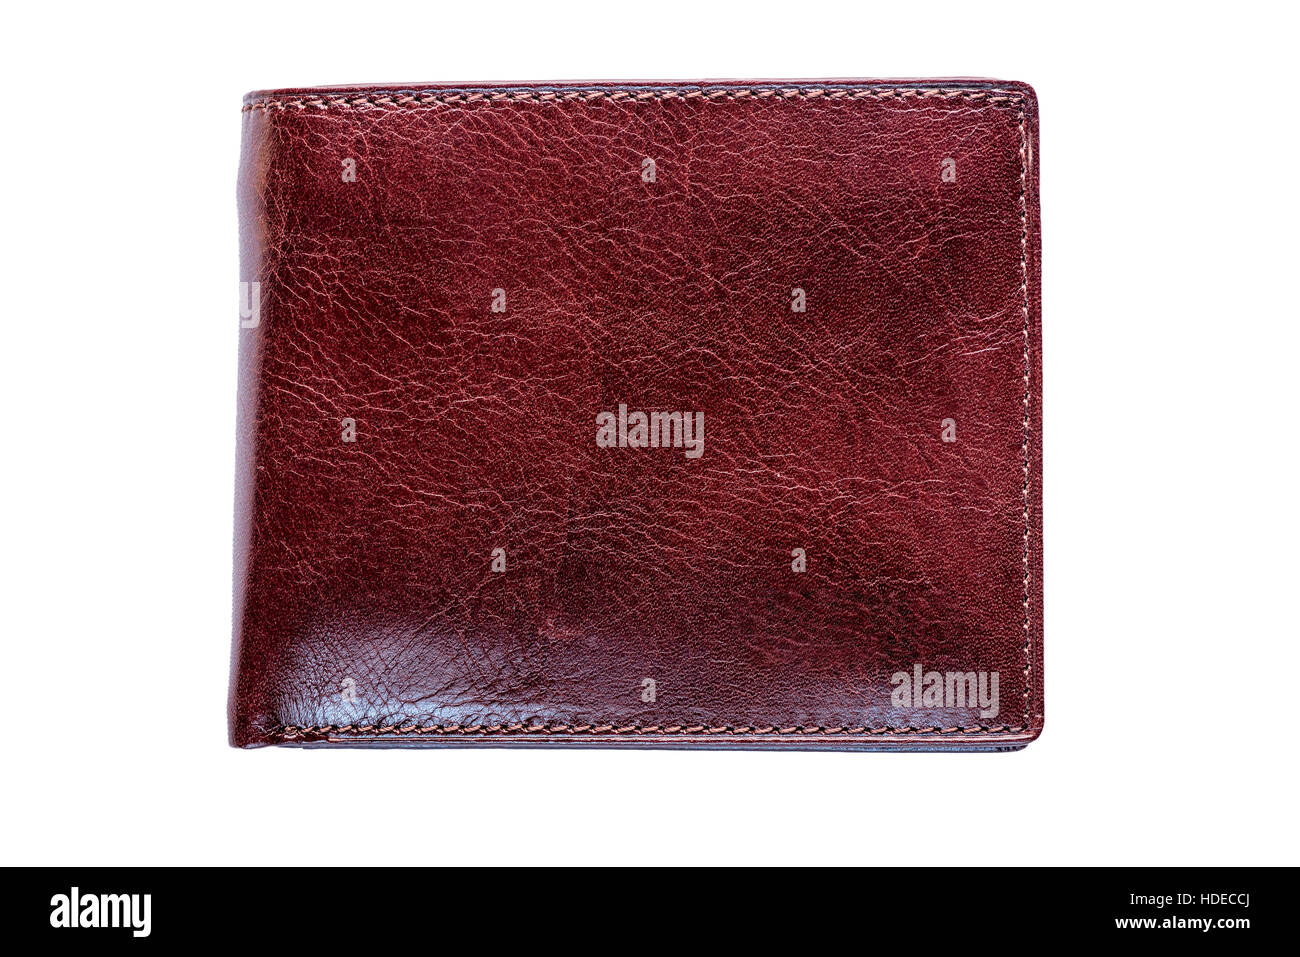 men's wallet brown color made of genuine leather isolated on a white background Stock Photo